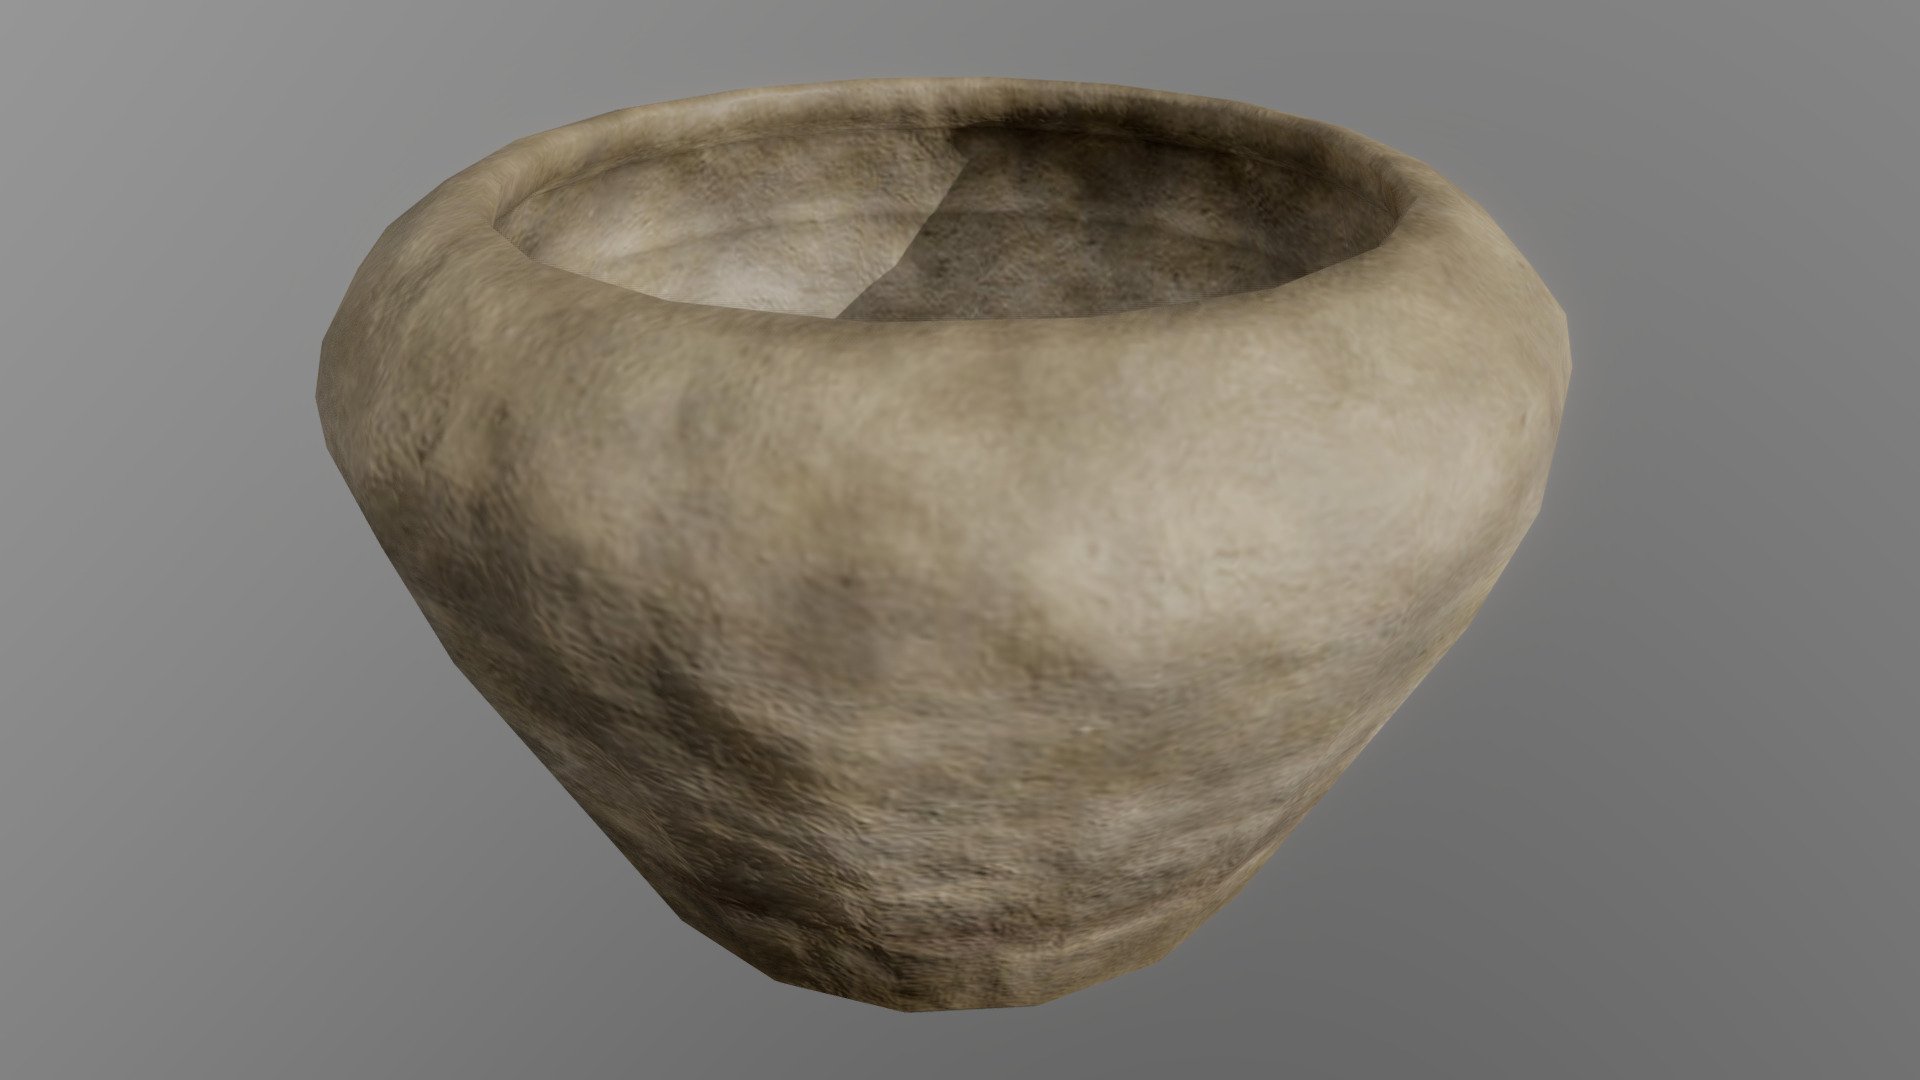 Clay Pot 3 (Viking)
Bring your 3D model of a clay pot to life with this  low-poly design. Perfect for use in games, animations, VR, AR, and more, this model is optimized for performance and still retains a high level of detail.


Features



low poly design with 252 vertices

504 edges

254 faces (polygons)

500 tris

2k PBR Textures and materials

File formats included: .obj, .fbx, .dae


Tools Used
This Clay Pot 3D model was created using Blender 3.3.1, a popular and versatile 3D creation software.


Availability
This low-poly Clay Pot 3D model is ready for use and available for purchase. Bring your project to the next level with this high-quality and optimized model 3d model